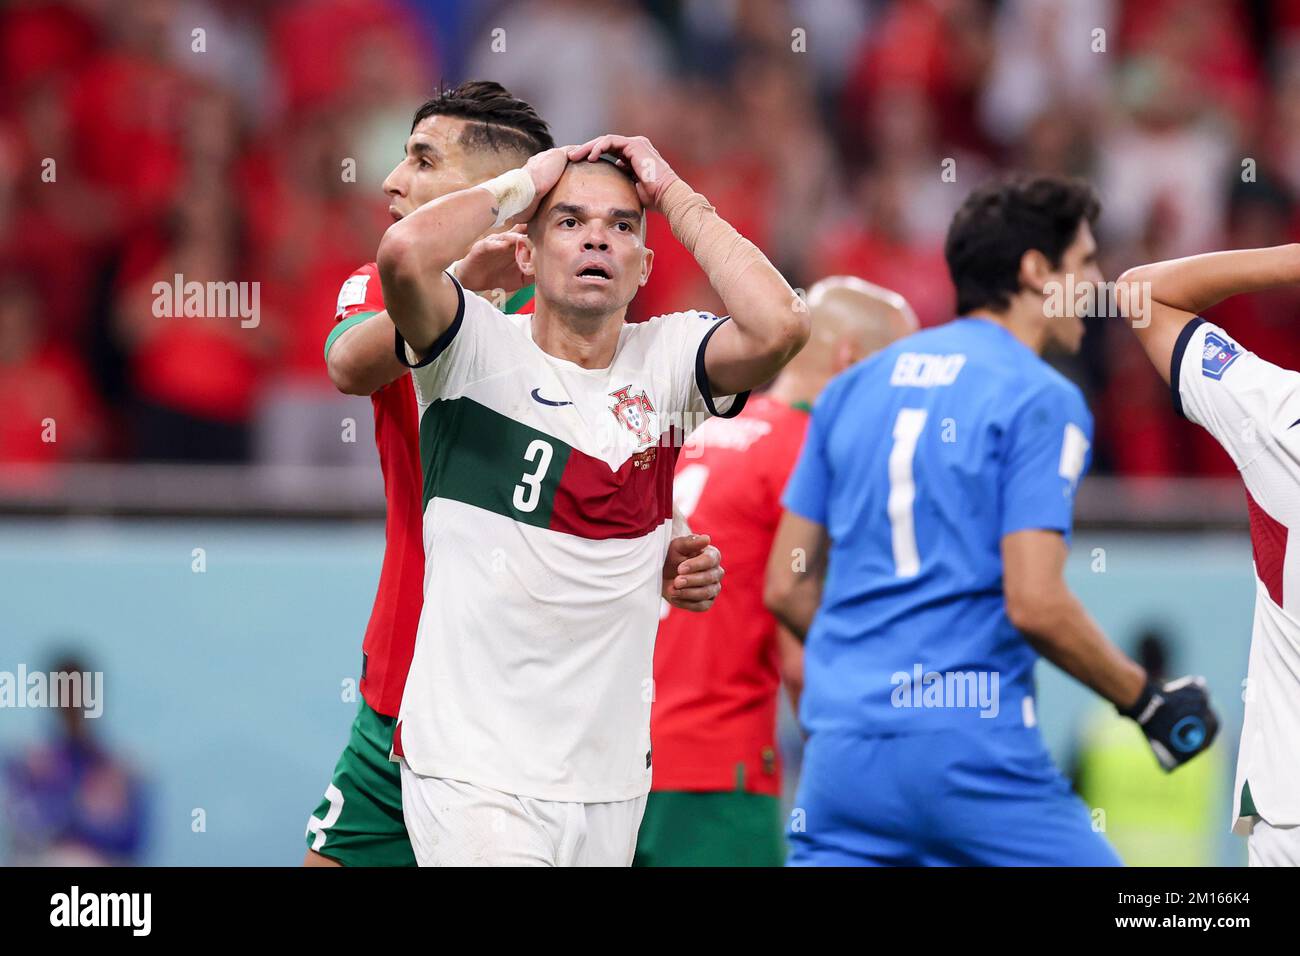 Doha, Qatar. 10th Dec, 2022. Pepe of Portugal reacts during the Quarterfinal between Morocco and Portugal of the 2022 FIFA World Cup at Al Thumama Stadium in Doha, Qatar, Dec. 10, 2022. Credit: Li Gang/Xinhua/Alamy Live News Stock Photo